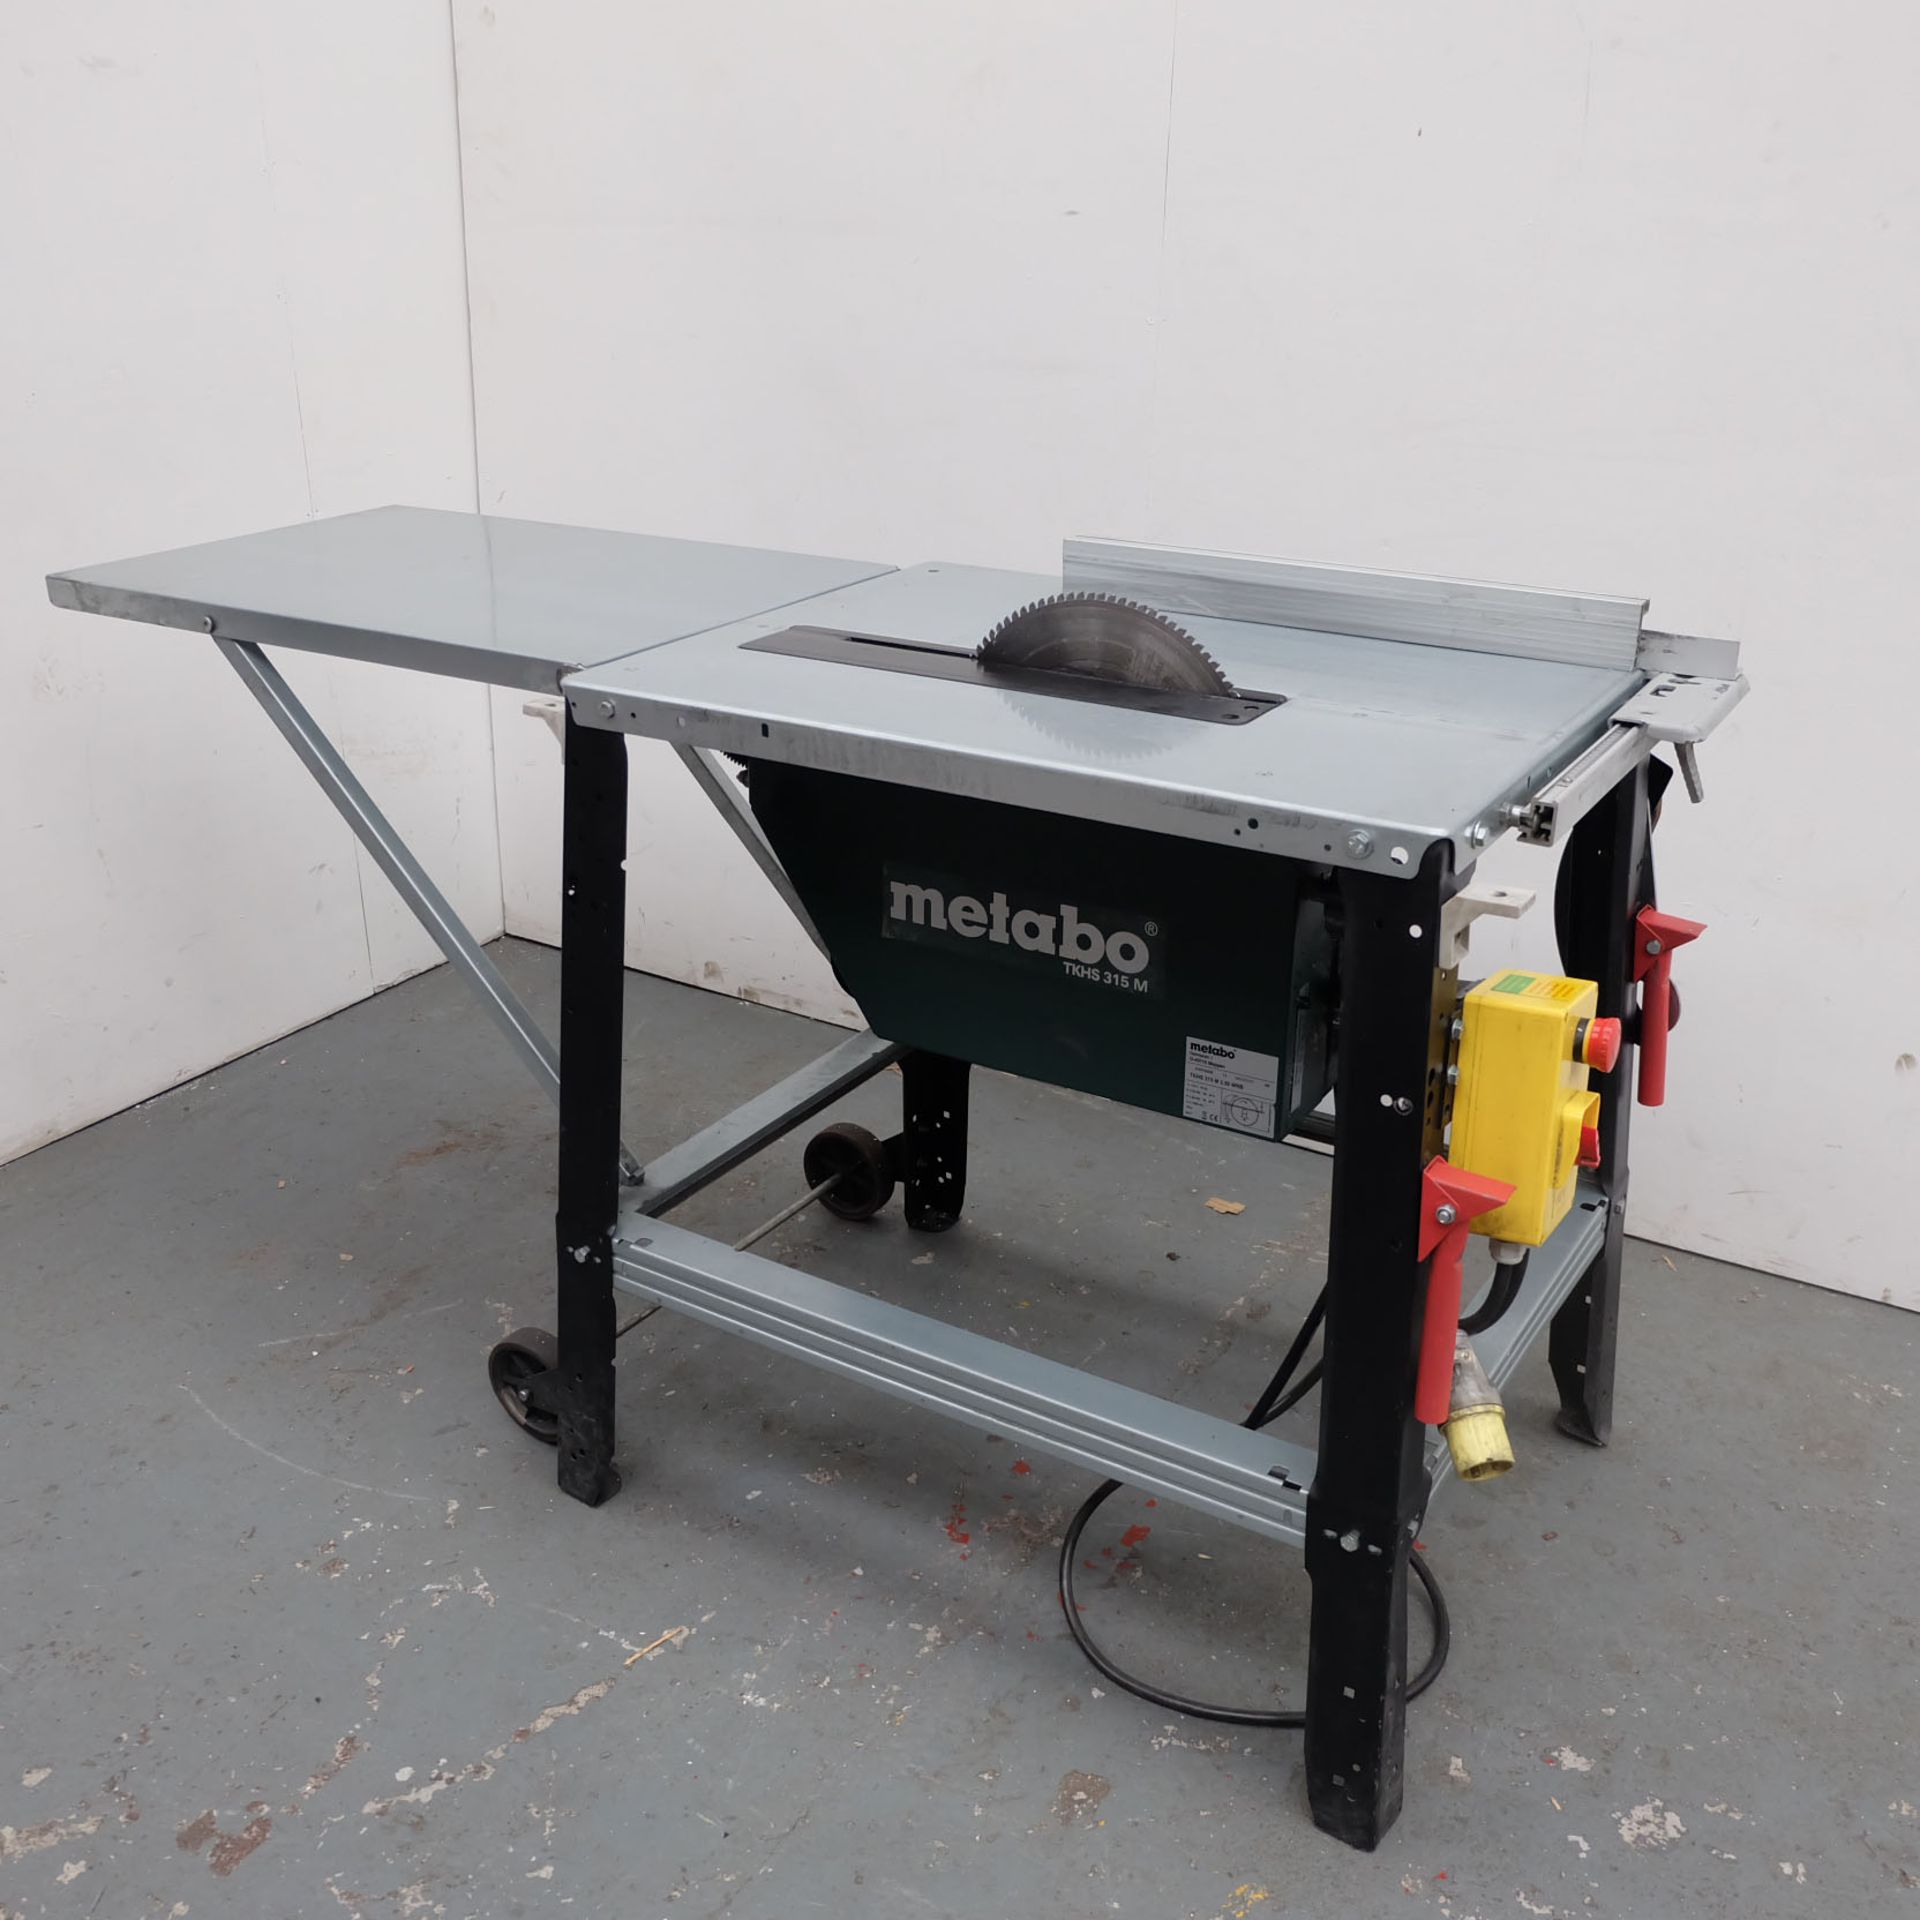 Metabo Model TKHS 315M. Woodworking Table Saw.